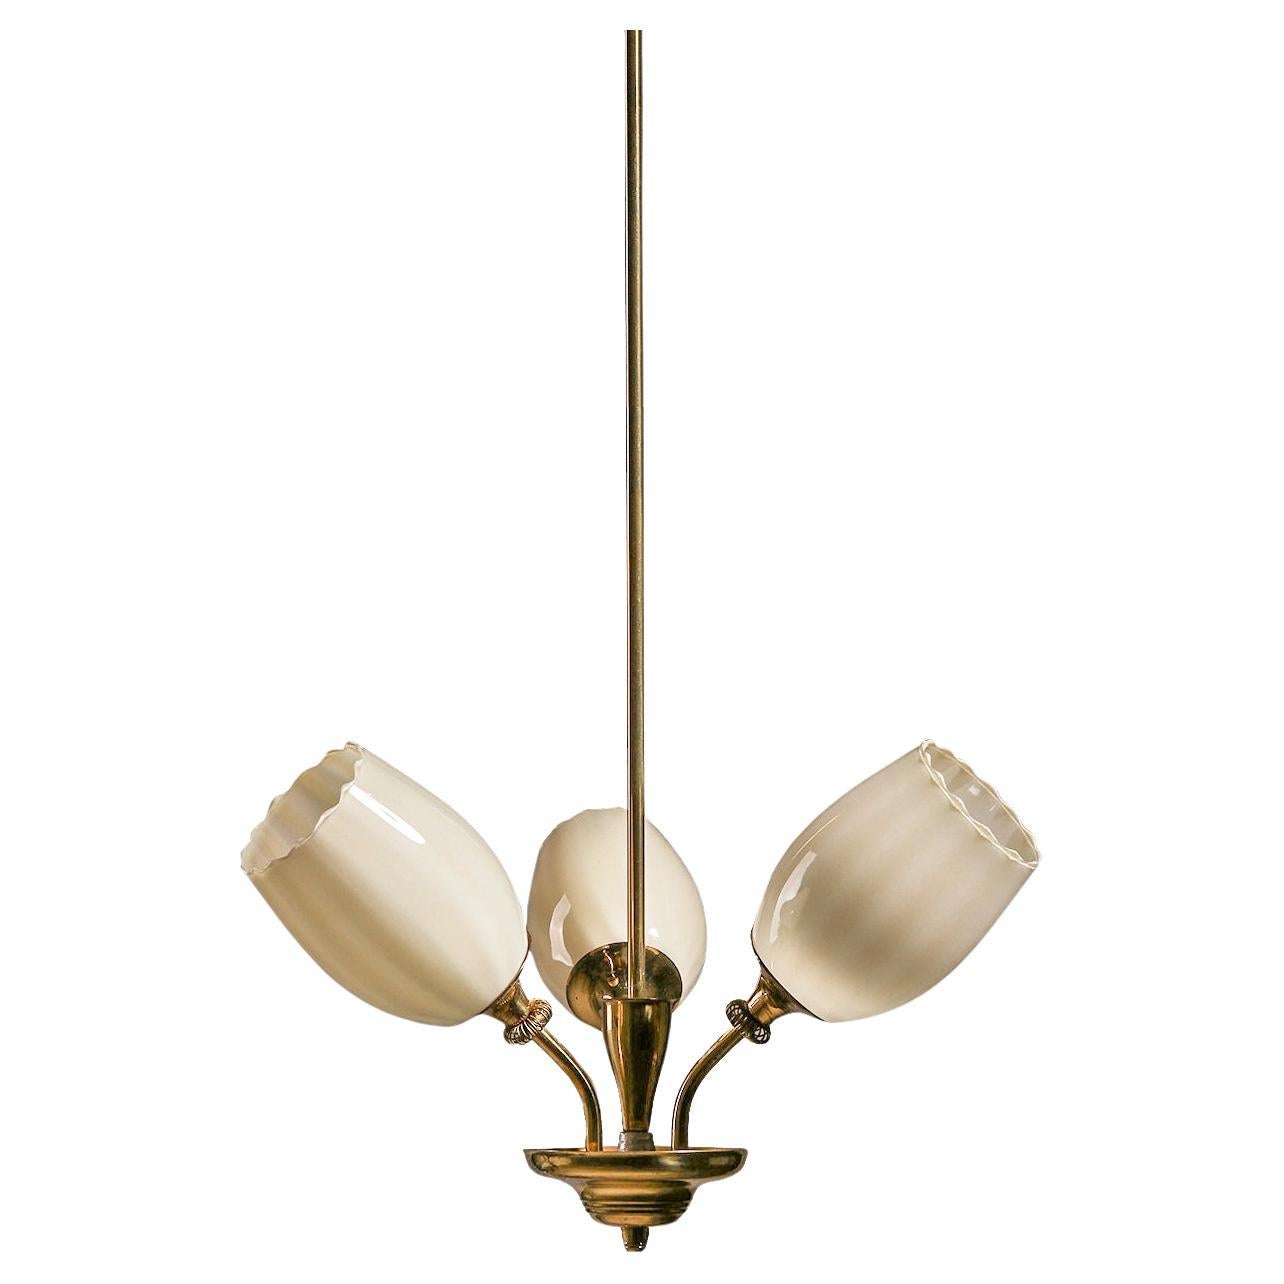 Itsu Oy "ER 5103/3" Pendant Lamp in Brass and Opaline Glass, Finland, 1950s For Sale